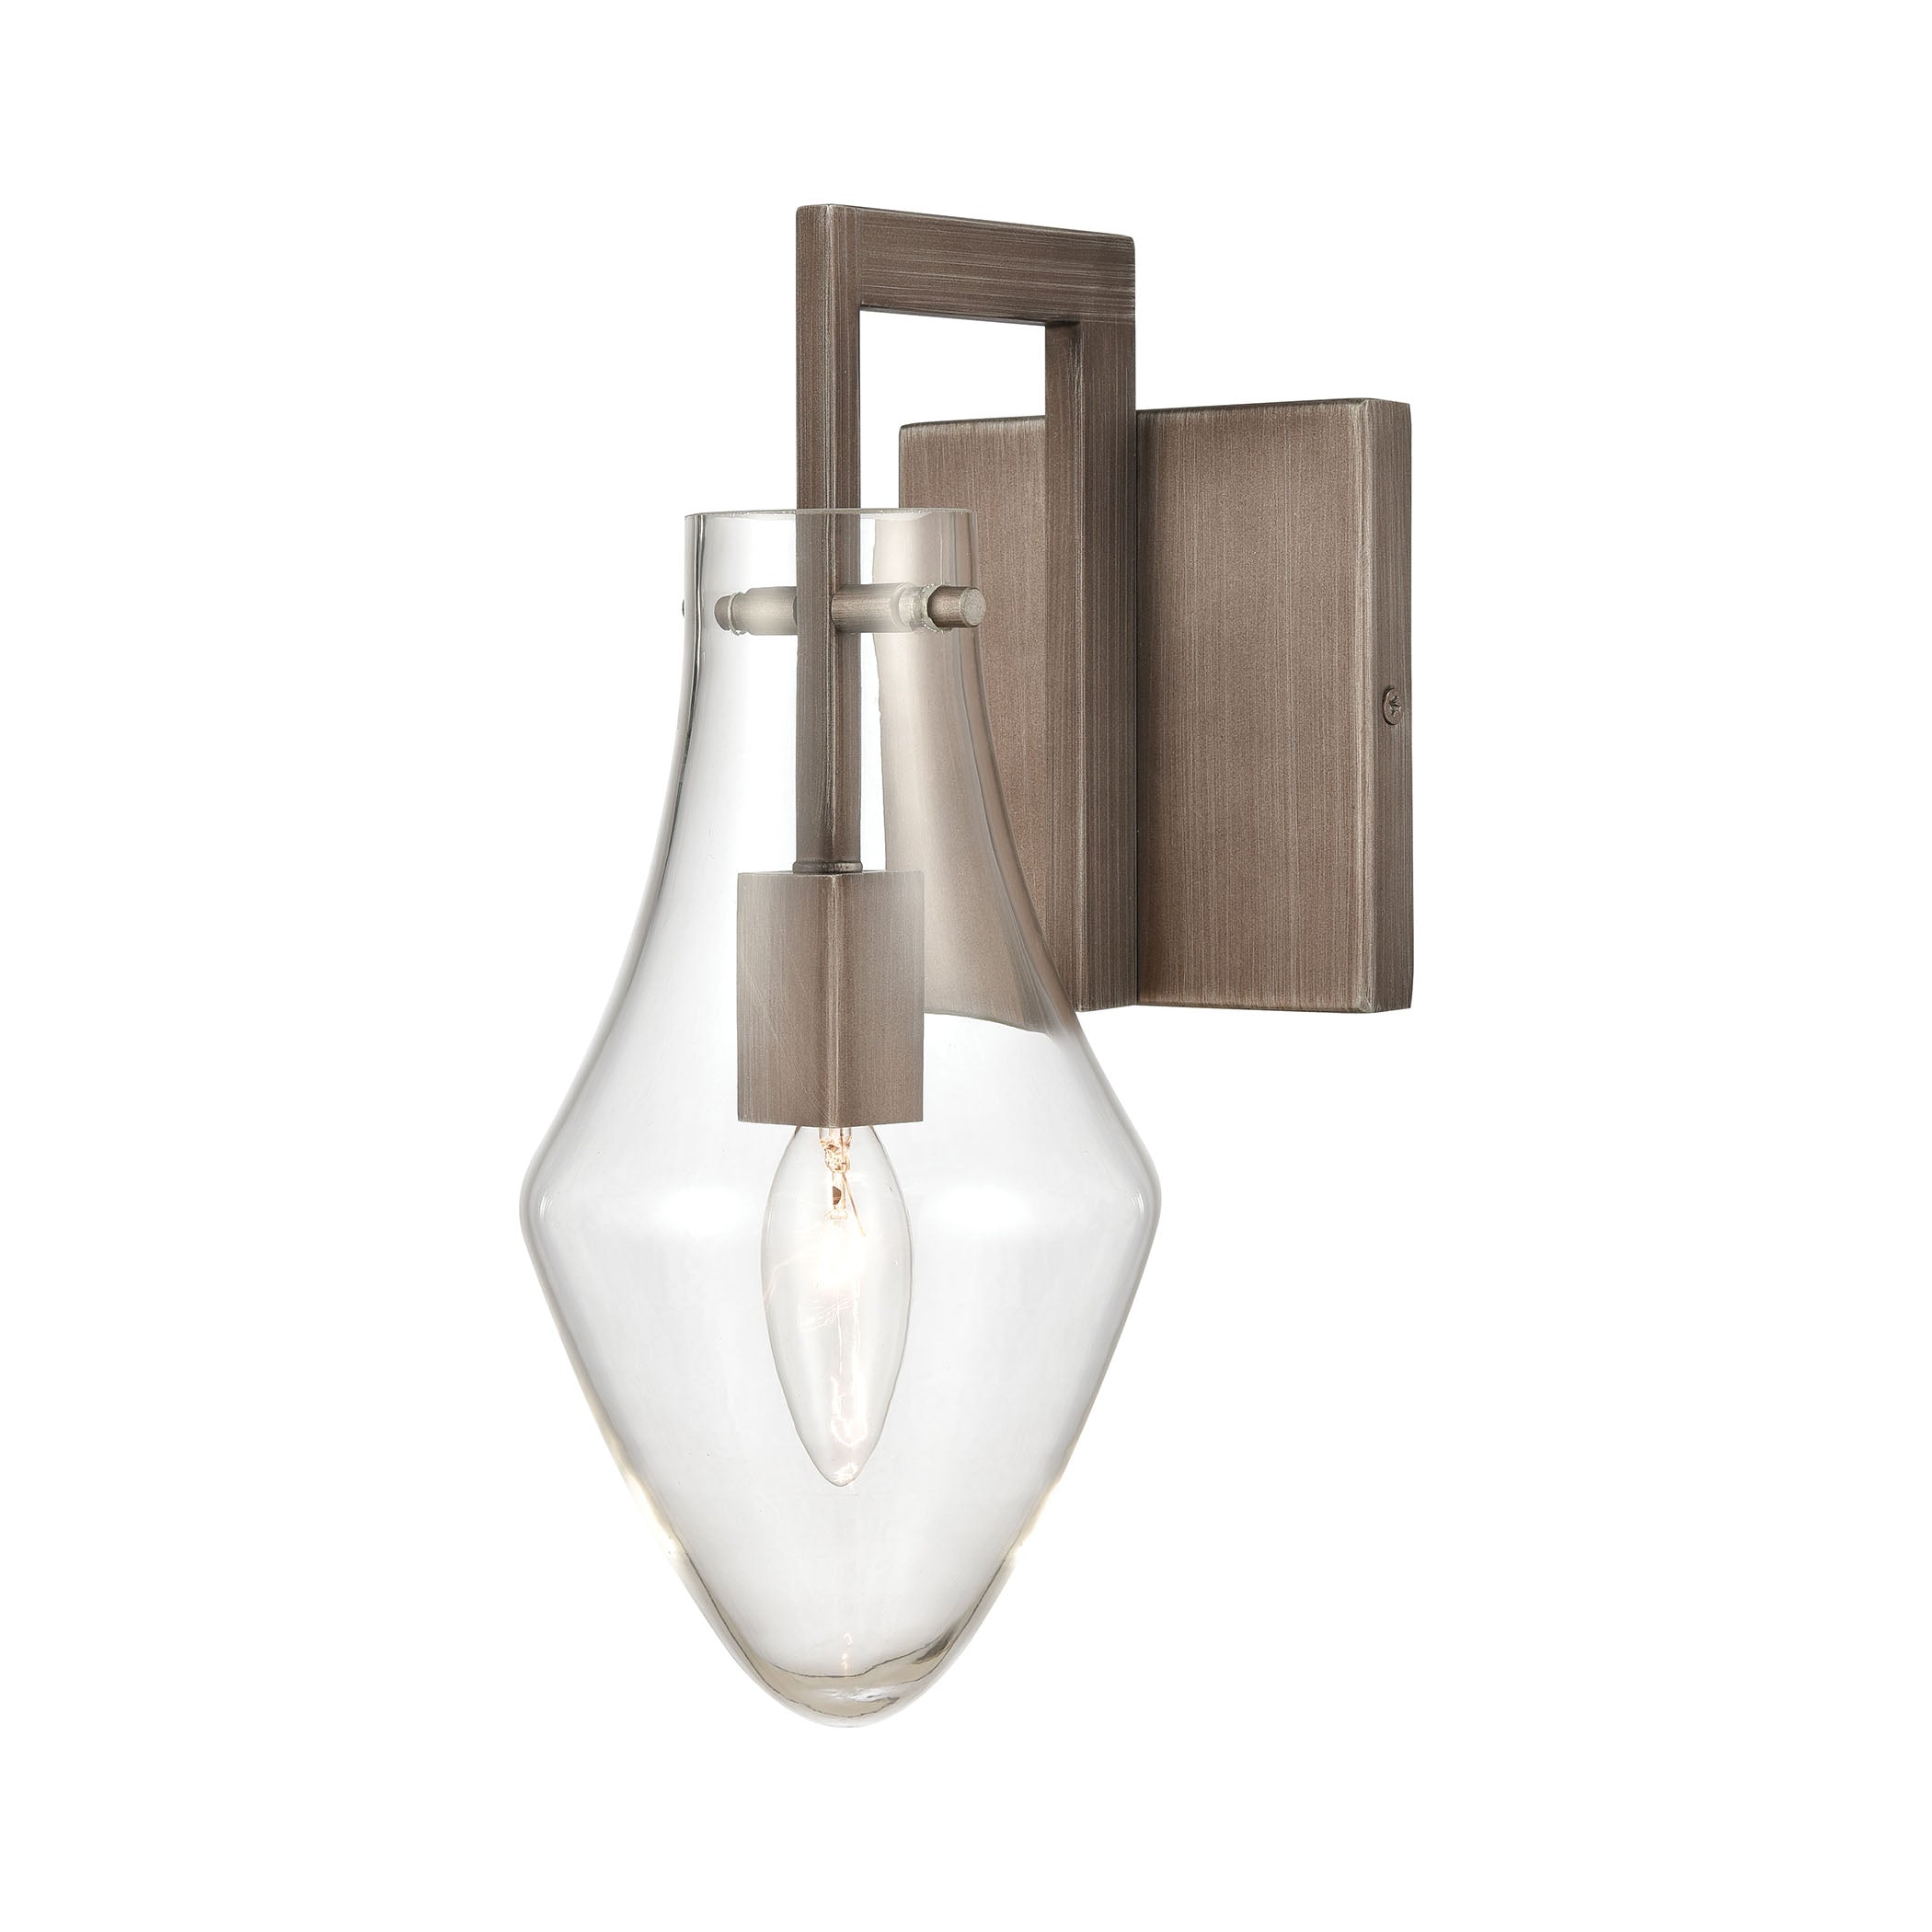 ELK Lighting 12291/1 Culmination 1-Light Vanity Light in Weathered Zinc with Clear Glass